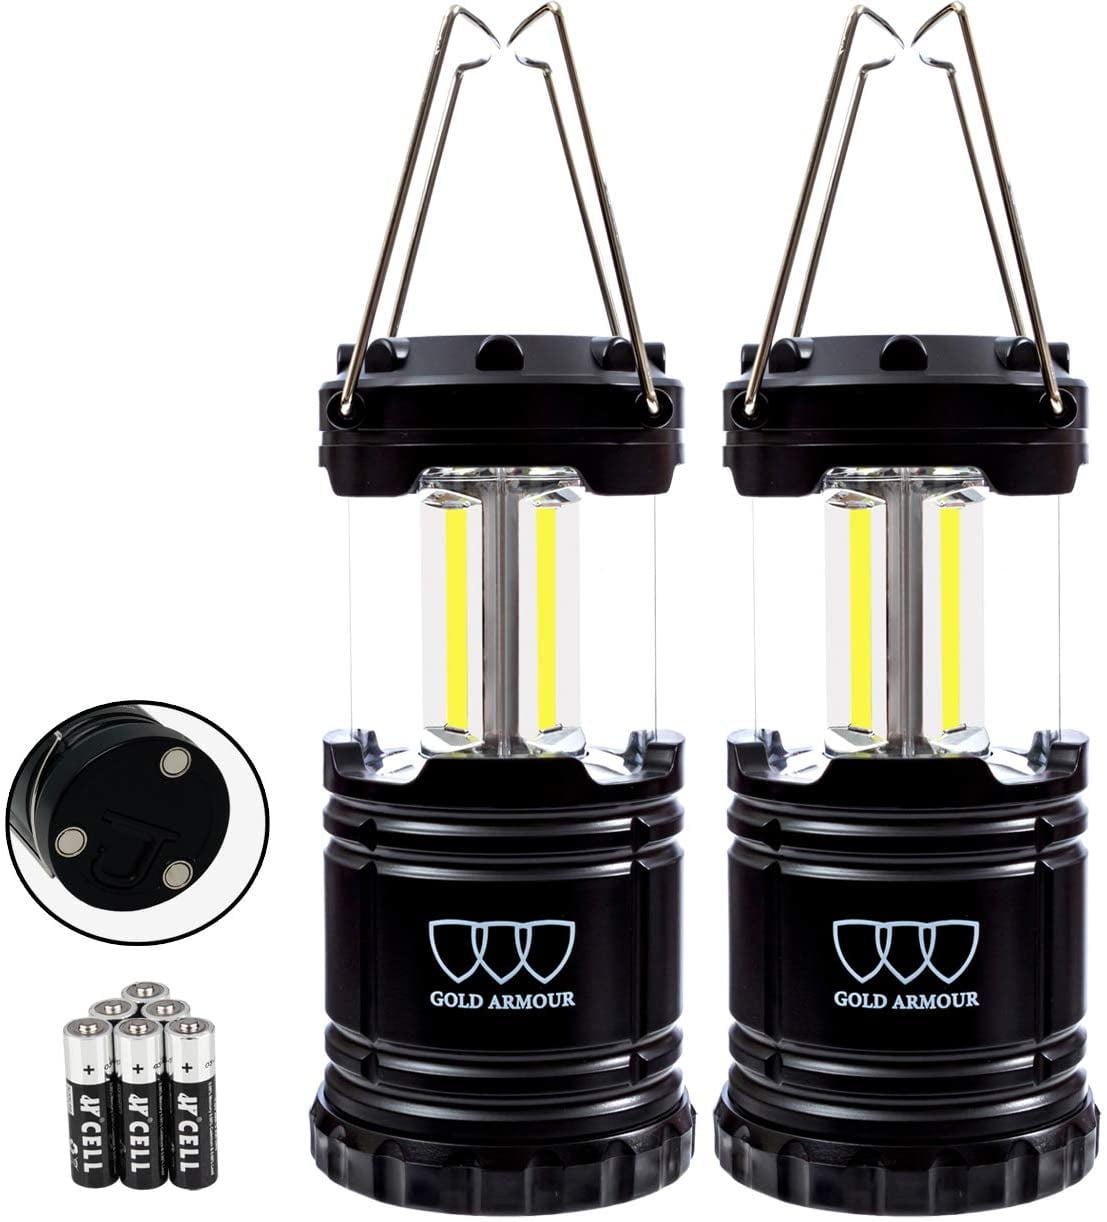 Hurricane Survival Kit for Emergency 2 Pack Portable LED Camping Lantern Flashlights with 6 AA Batteries Outage